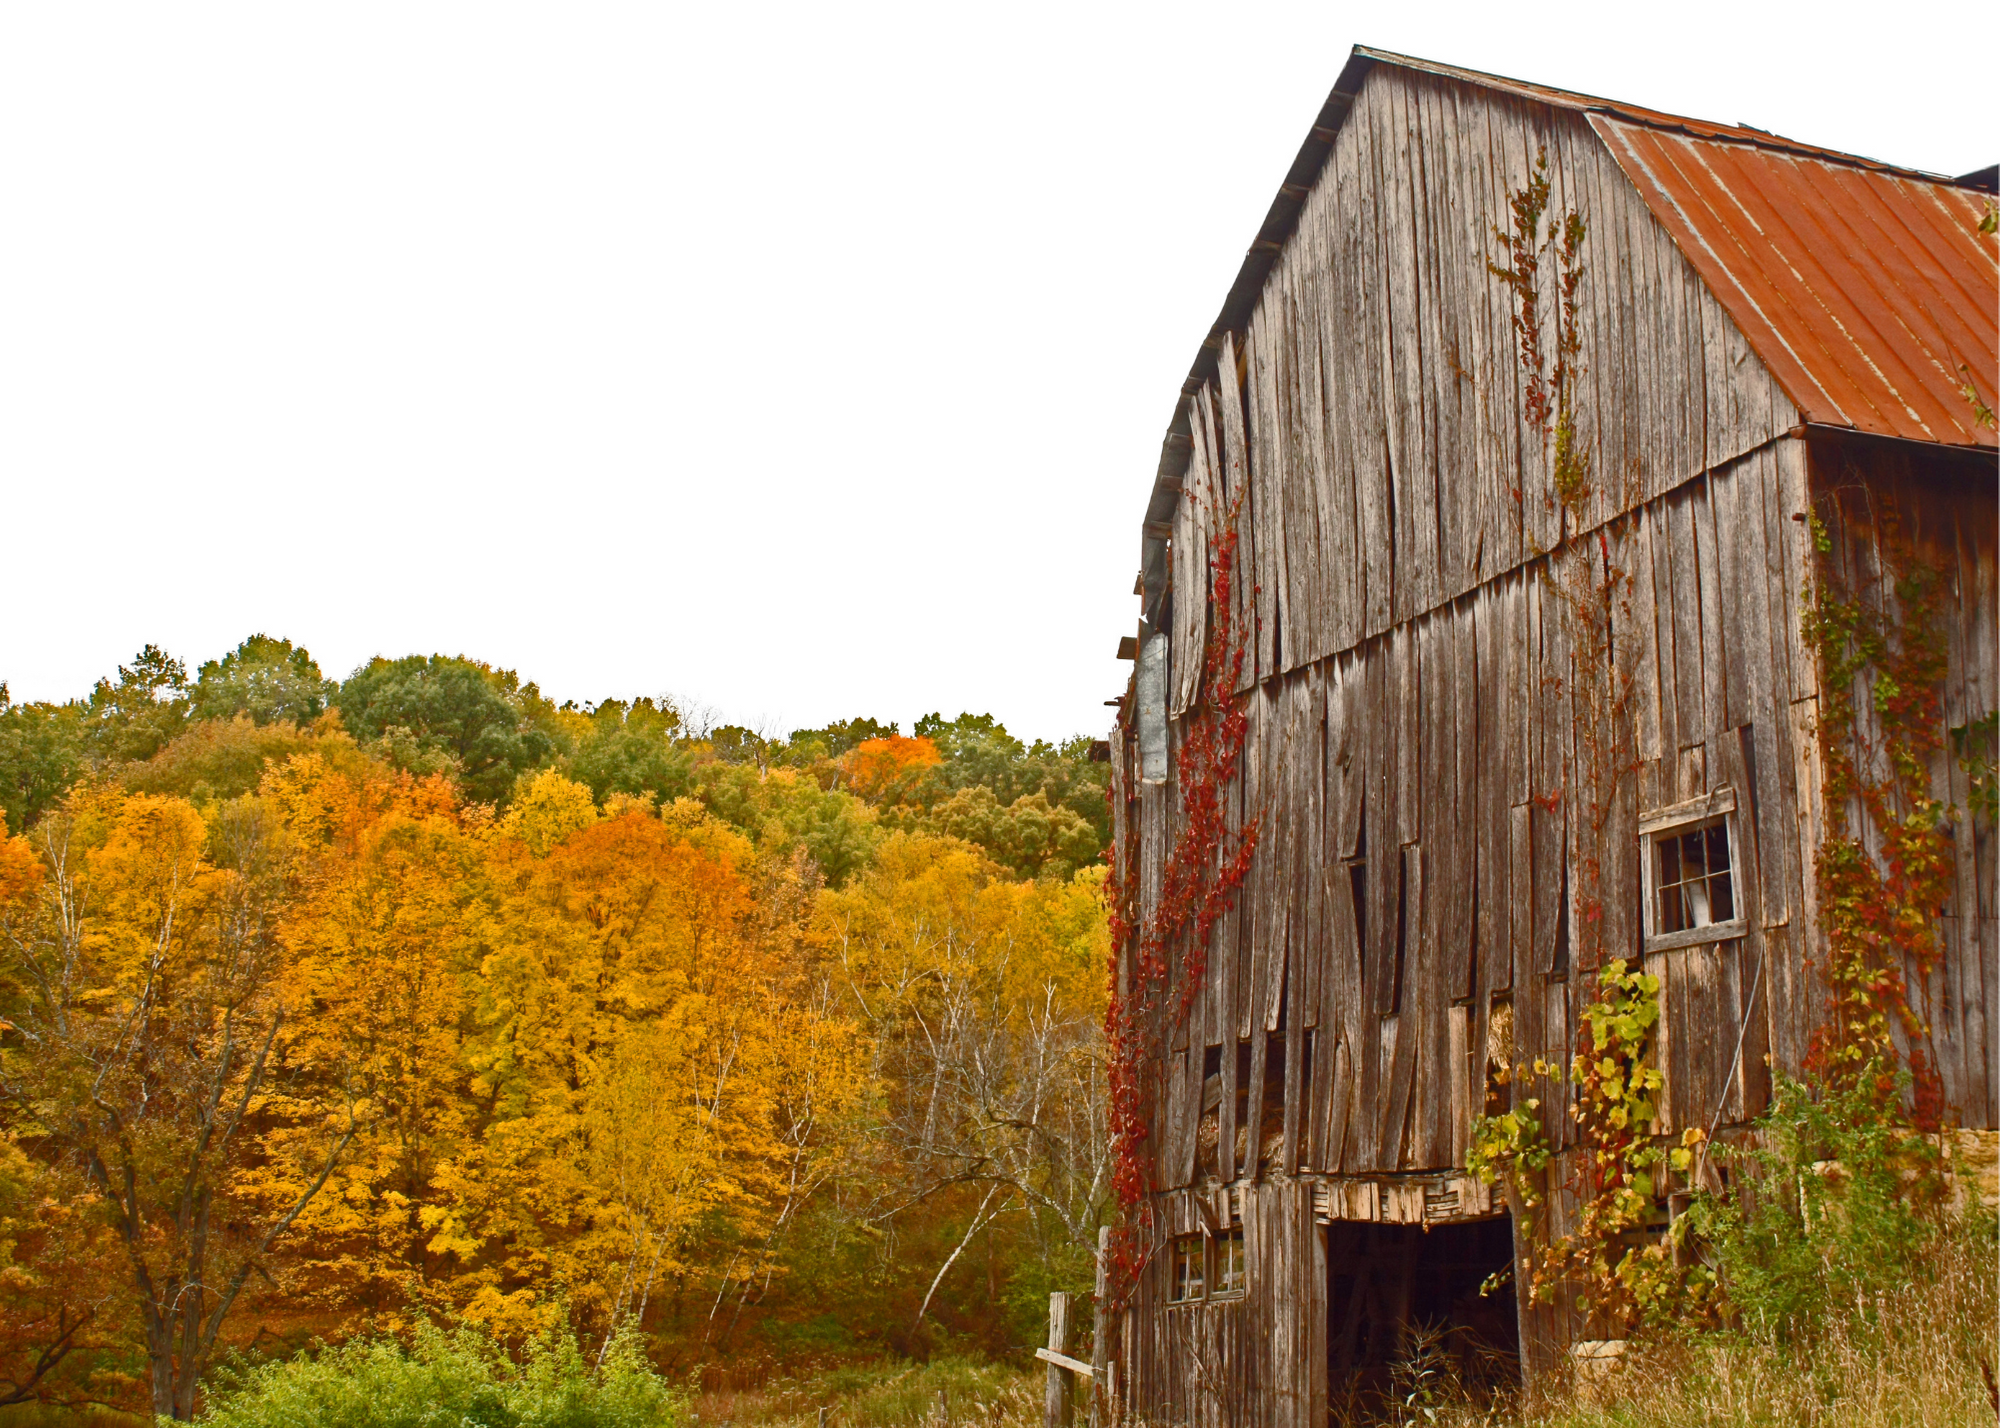 The front 3/4 angle of a dilapidated barn made of wood with a metal roof with fall colored trees in the background.